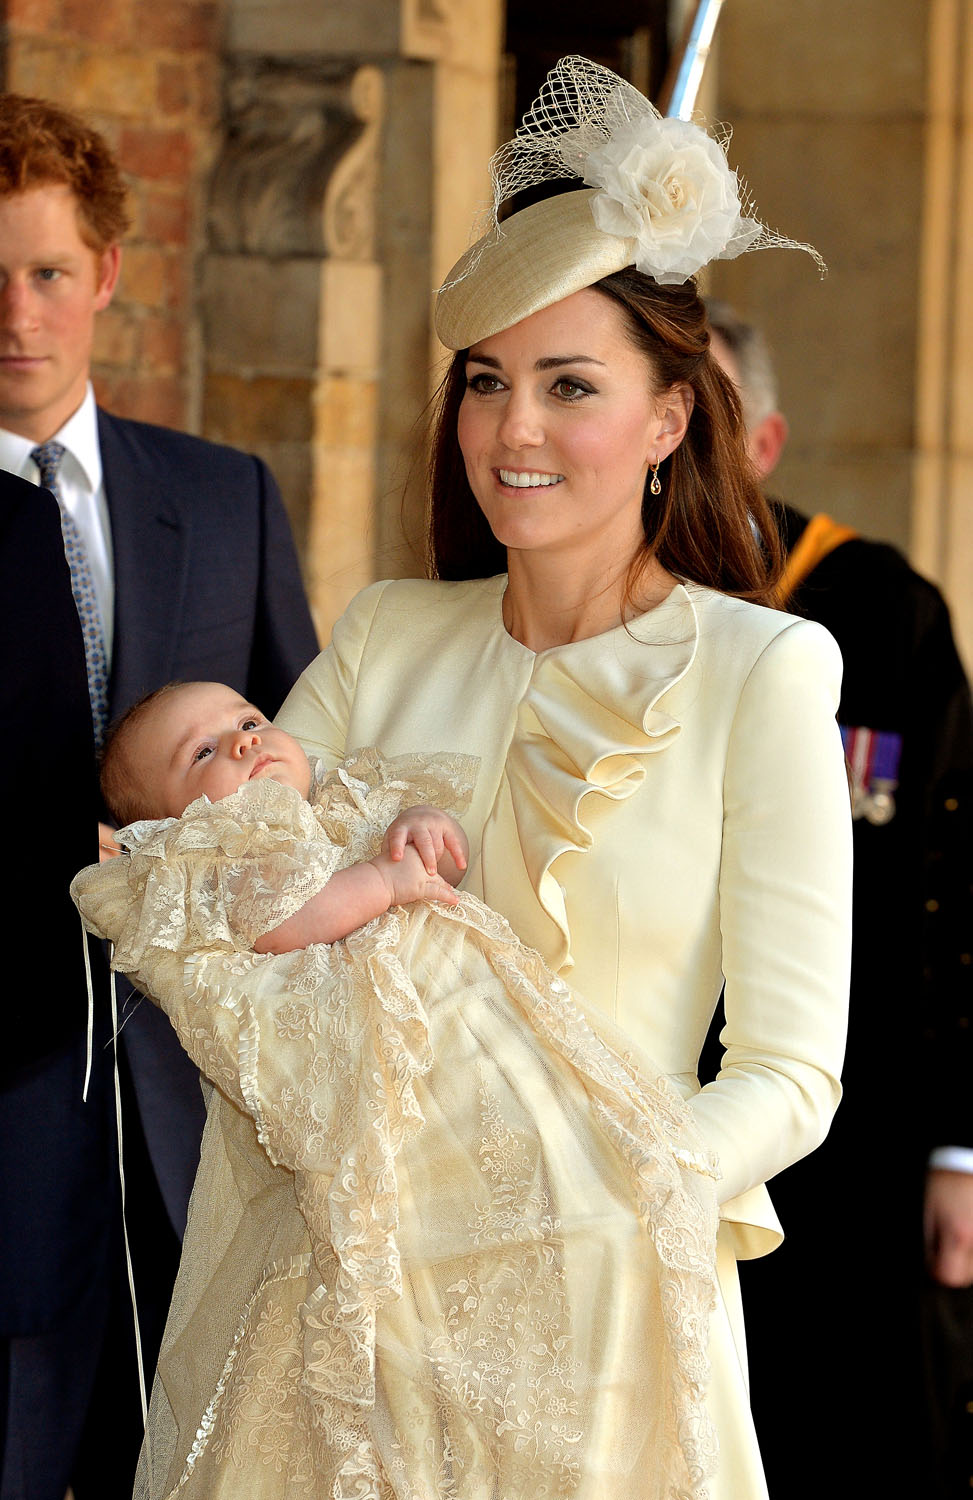 Baby Scene StealerCatherine, Duchess of Cambridge carries her son Prince George Of Cambridge after his christening at the Chapel Royal in St James's Palace on October 23, 2013 in London.